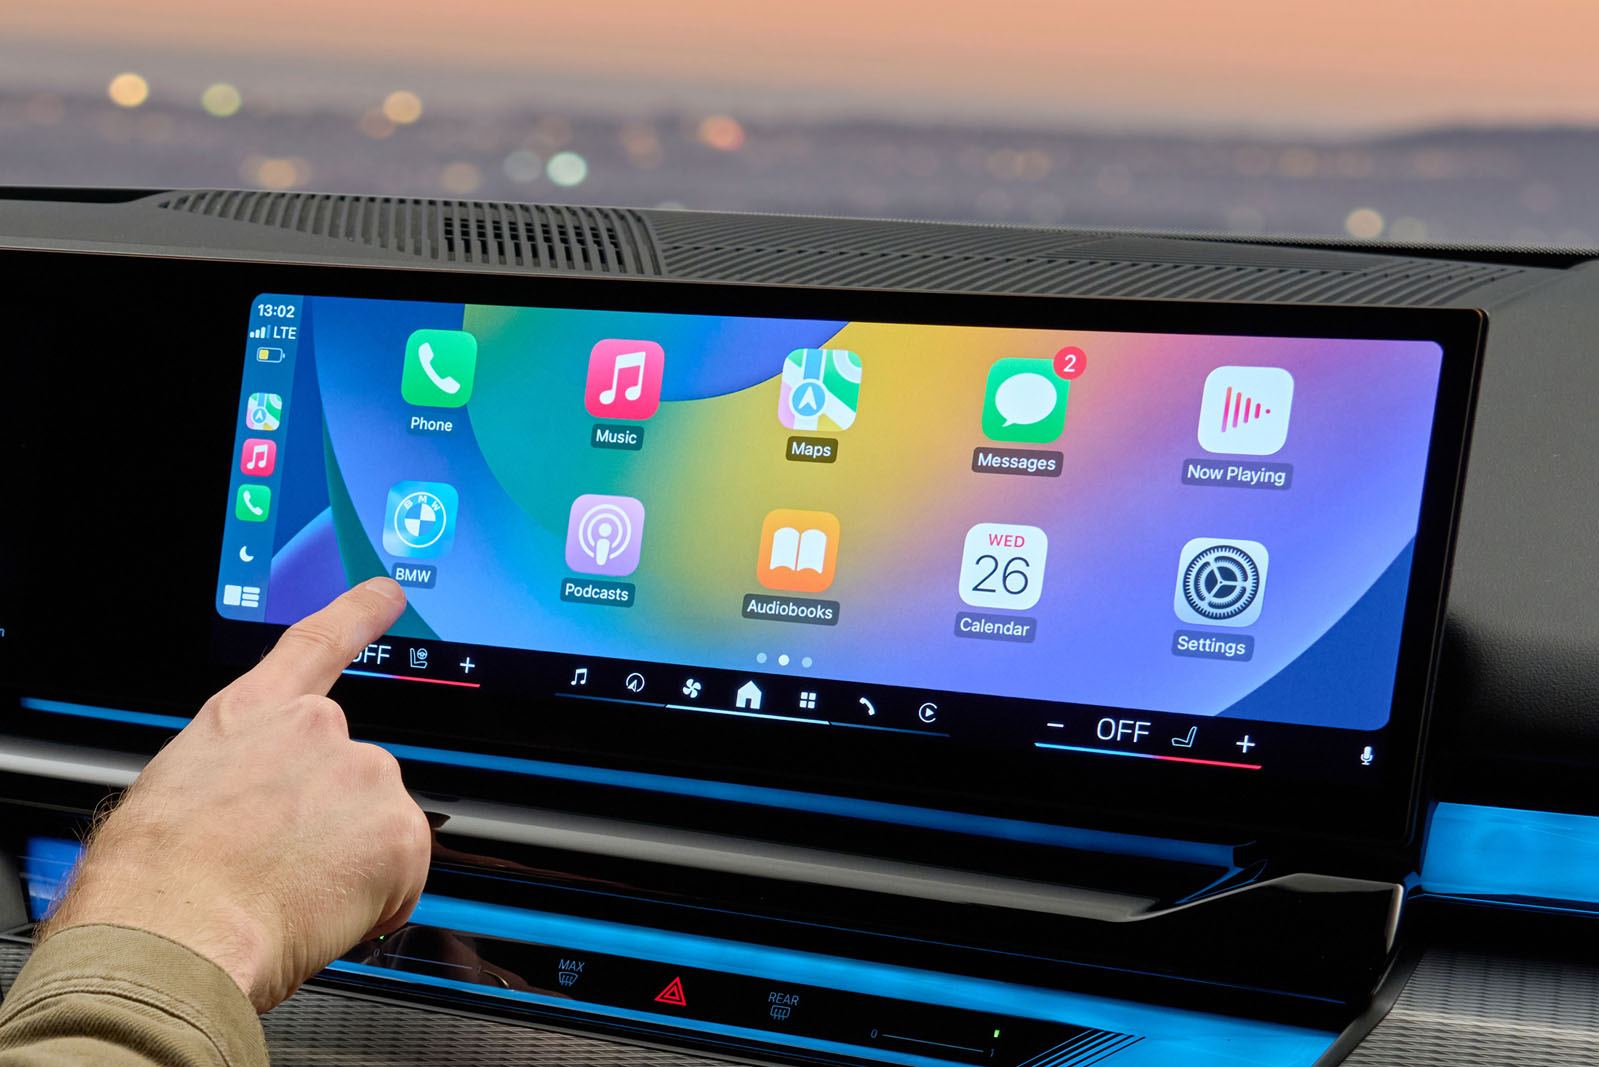 BMW Wants You to Pay an Annual Fee to Access Apple CarPlay